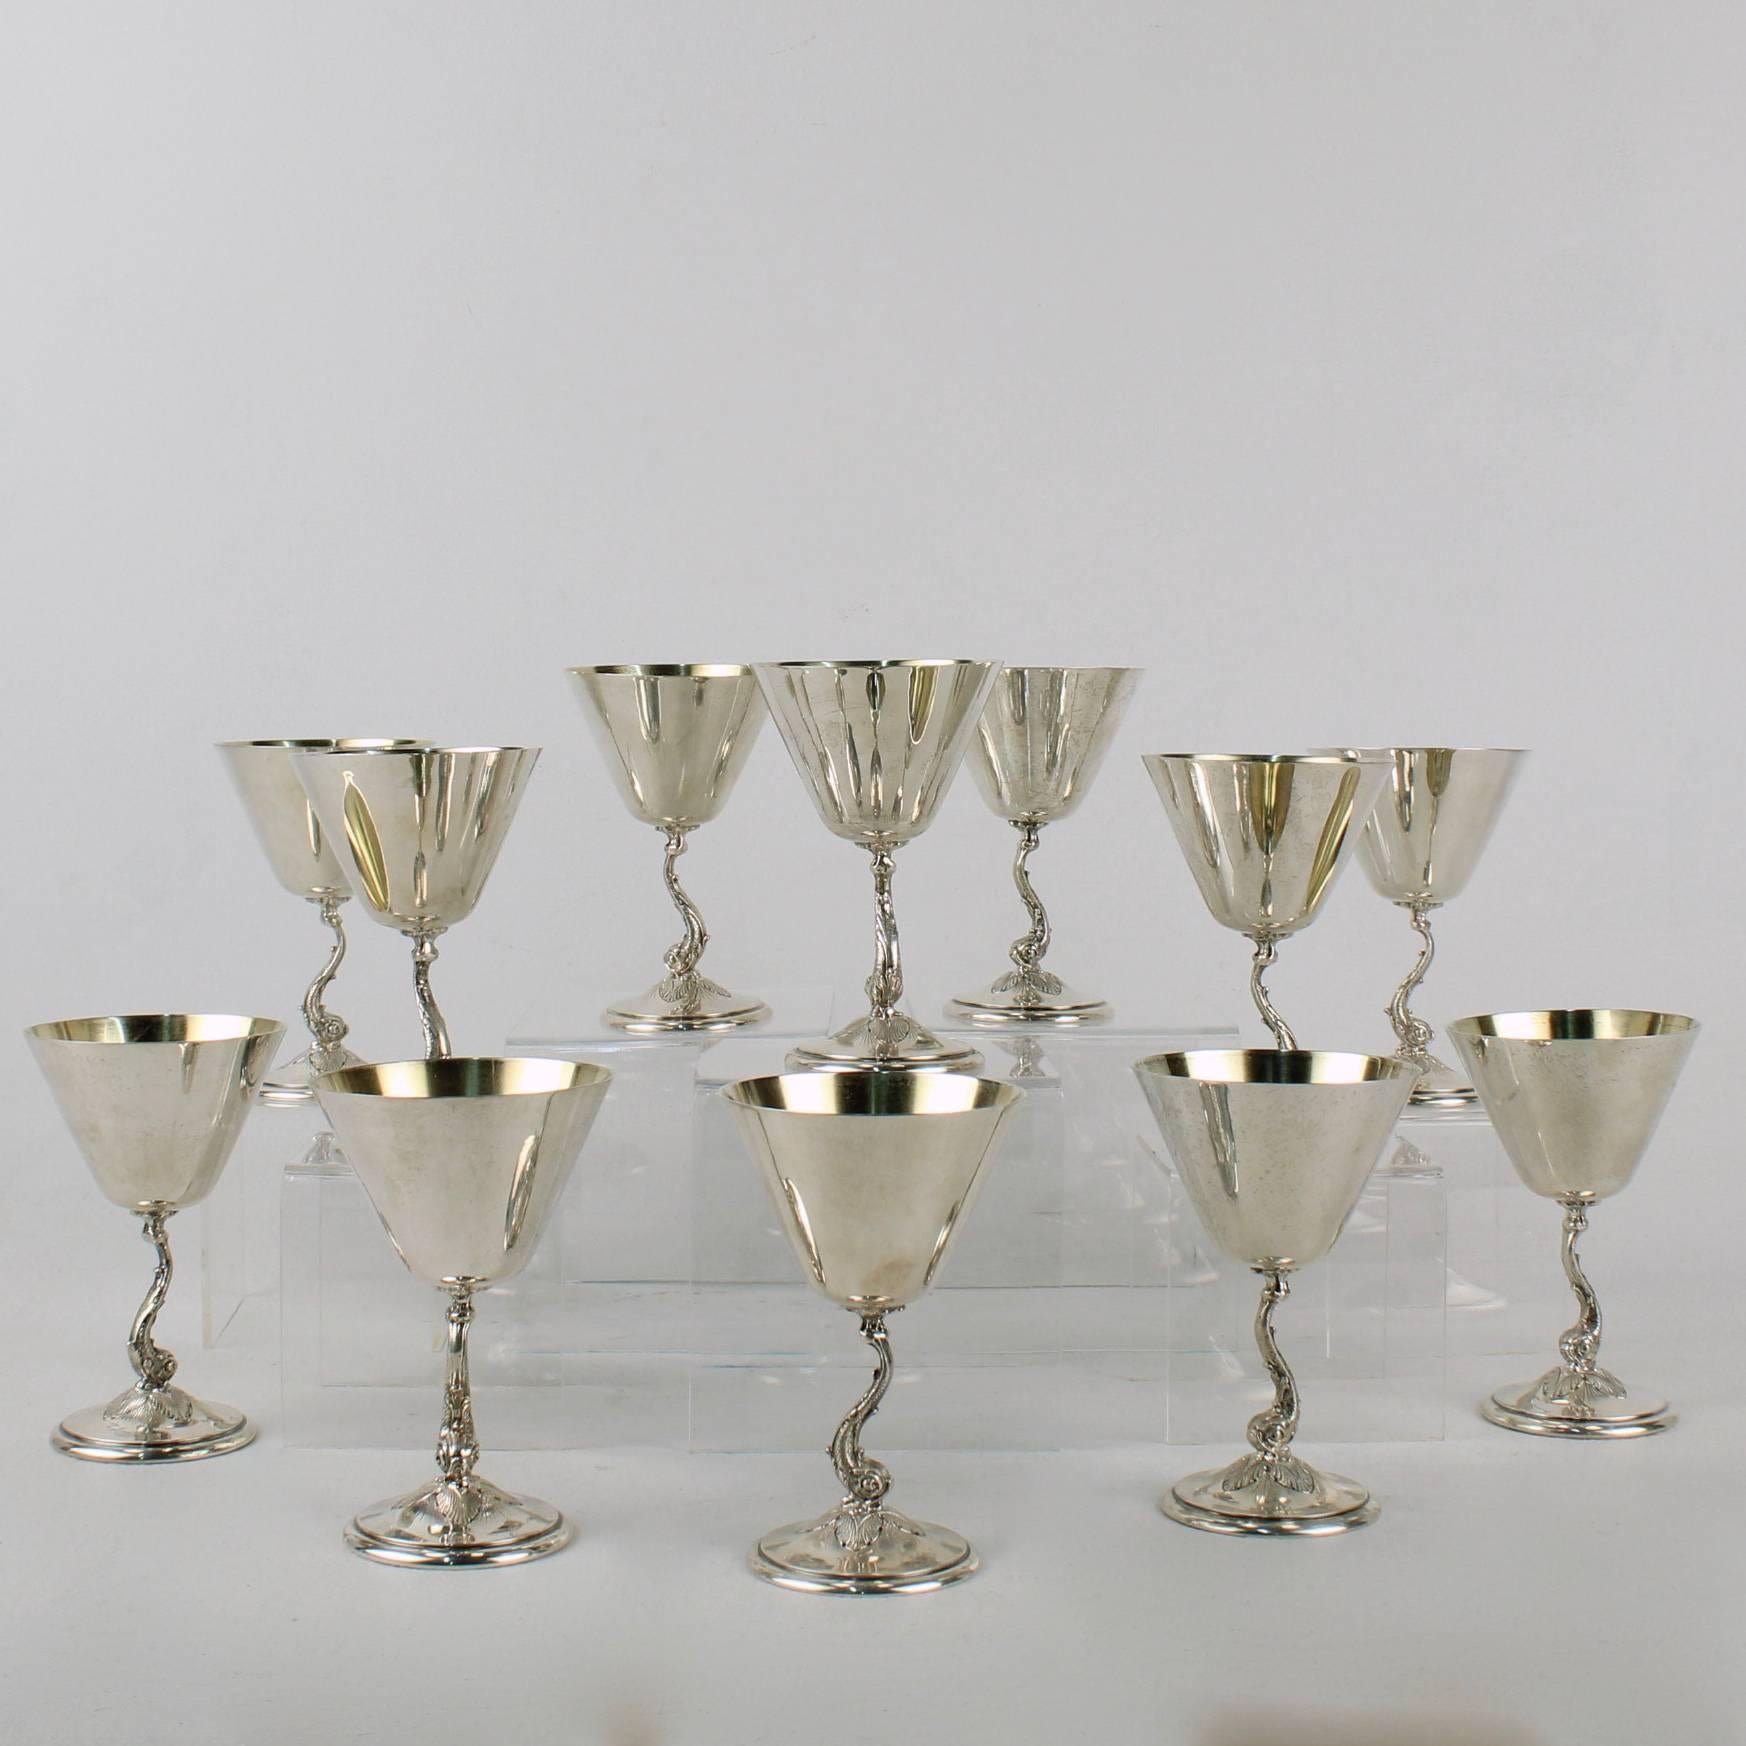 12 Gorham Art Deco Sterling Silver Dolphin Martini Goblets or Cocktail Stems 3